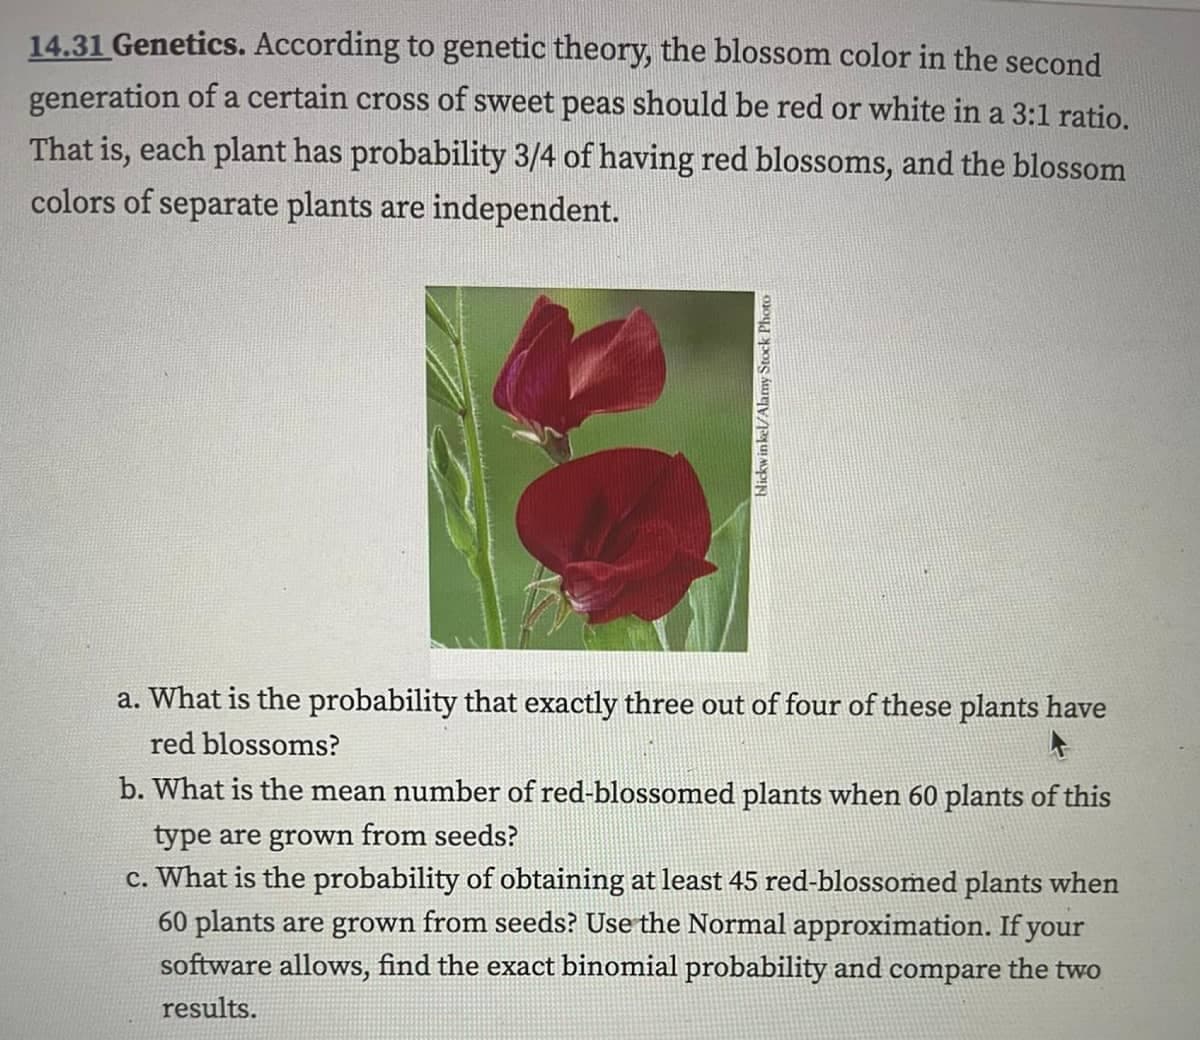 14.31 Genetics. According to genetic theory, the blossom color in the second
generation of a certain cross of sweet peas should be red or white in a 3:1 ratio.
That is, each plant has probability 3/4 of having red blossoms, and the blossom
colors of separate plants are independent.
blickwinkel/Alamy Stock Photo
a. What is the probability that exactly three out of four of these plants have
red blossoms?
b. What is the mean number of red-blossomed plants when 60 plants of this
type are grown from seeds?
c. What is the probability of obtaining at least 45 red-blossomed plants when
60 plants are grown from seeds? Use the Normal approximation. If your
software allows, find the exact binomial probability and compare the two
results.